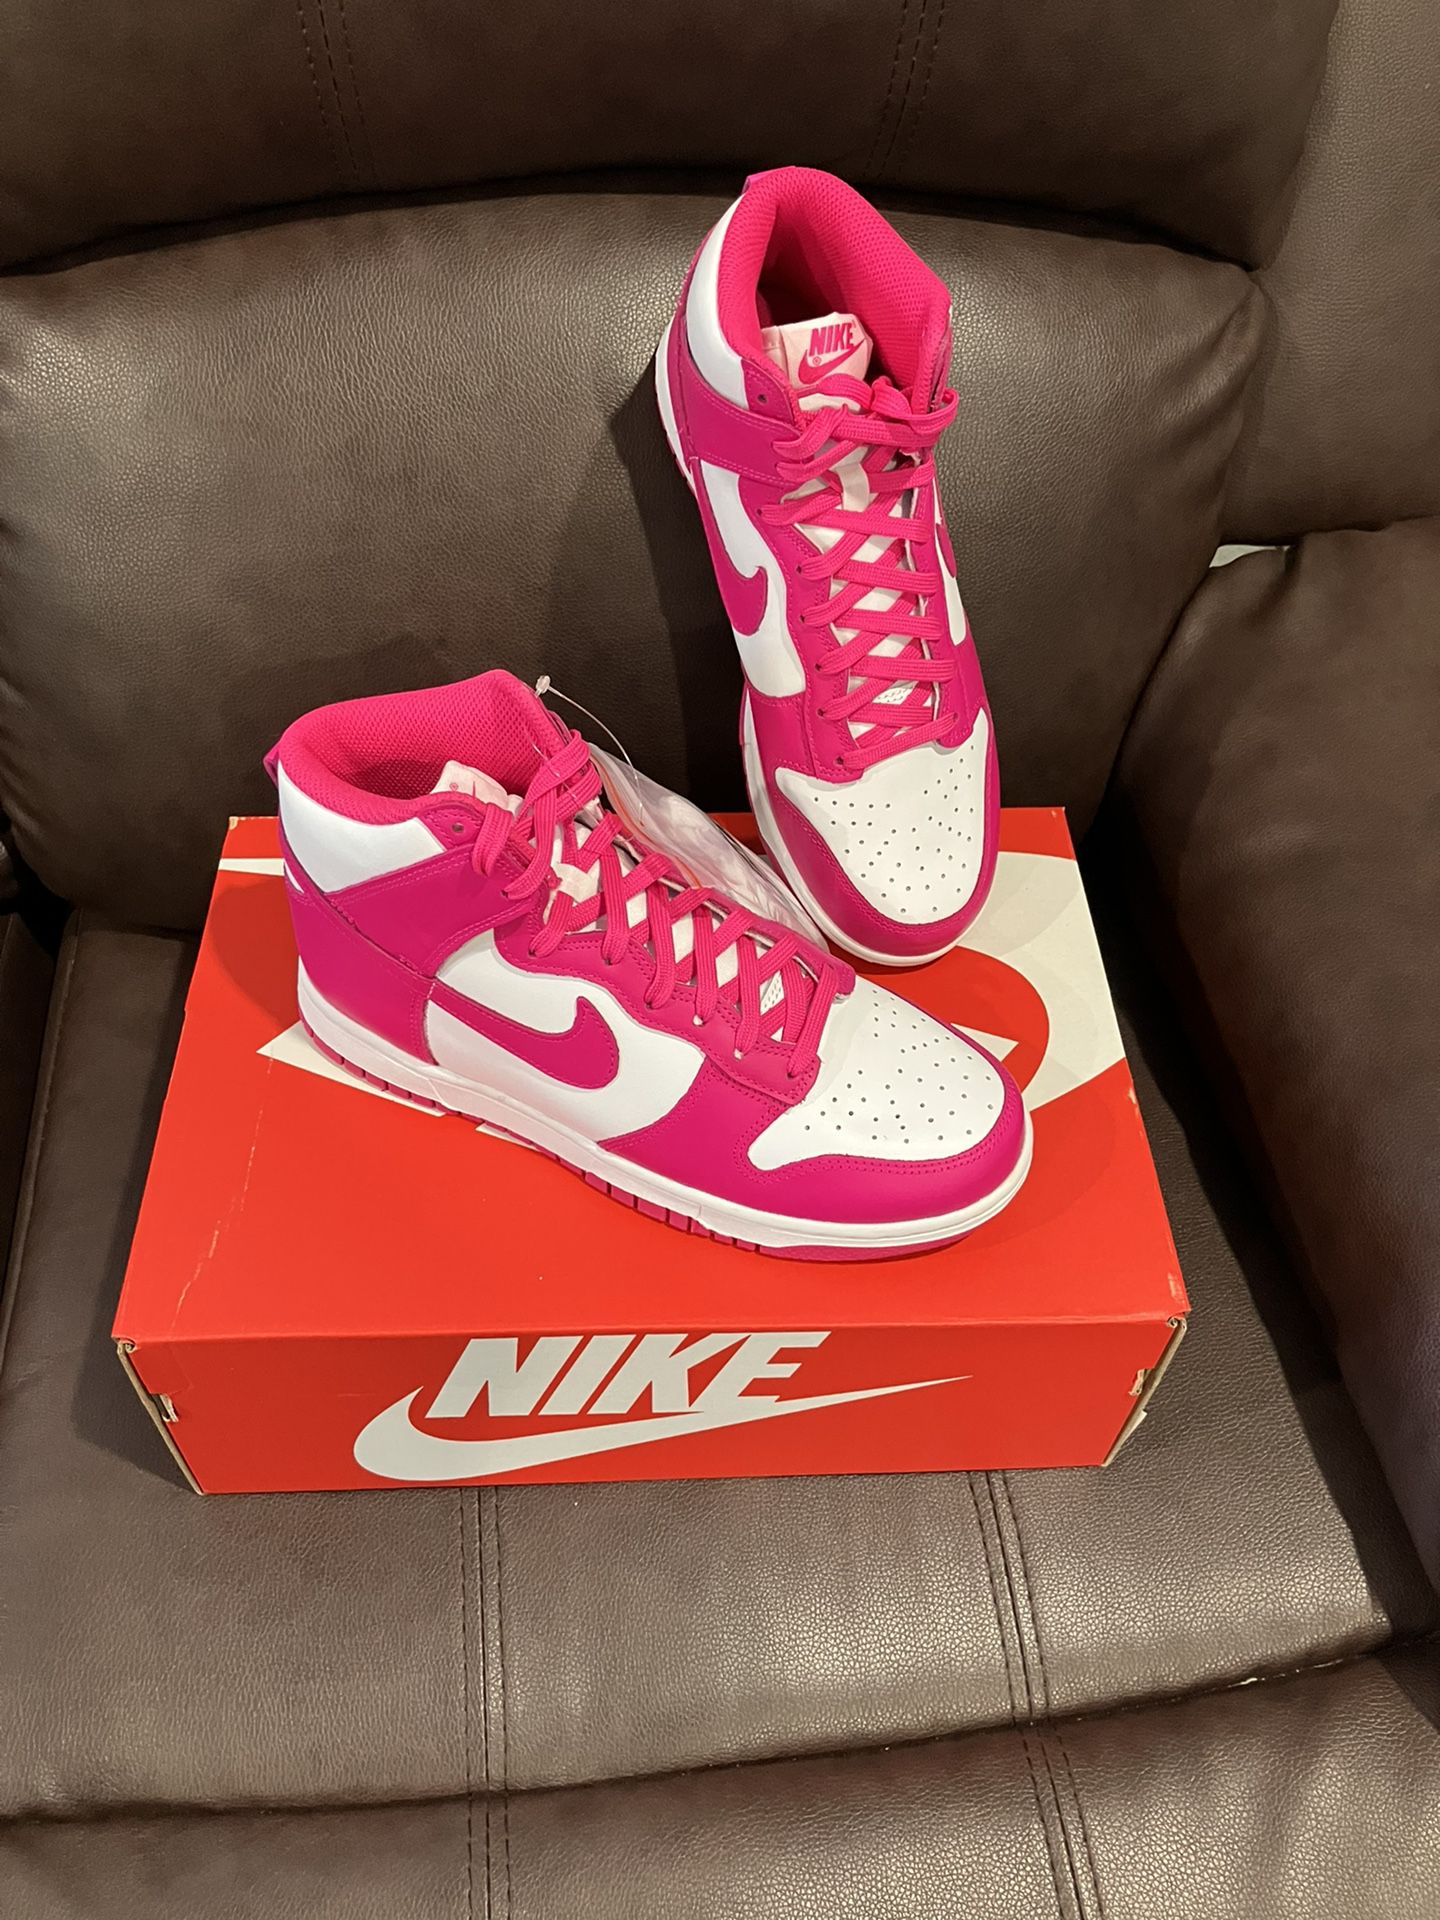 Nike Dunk High Prime Pink Size 8W 6.5Y Gs 